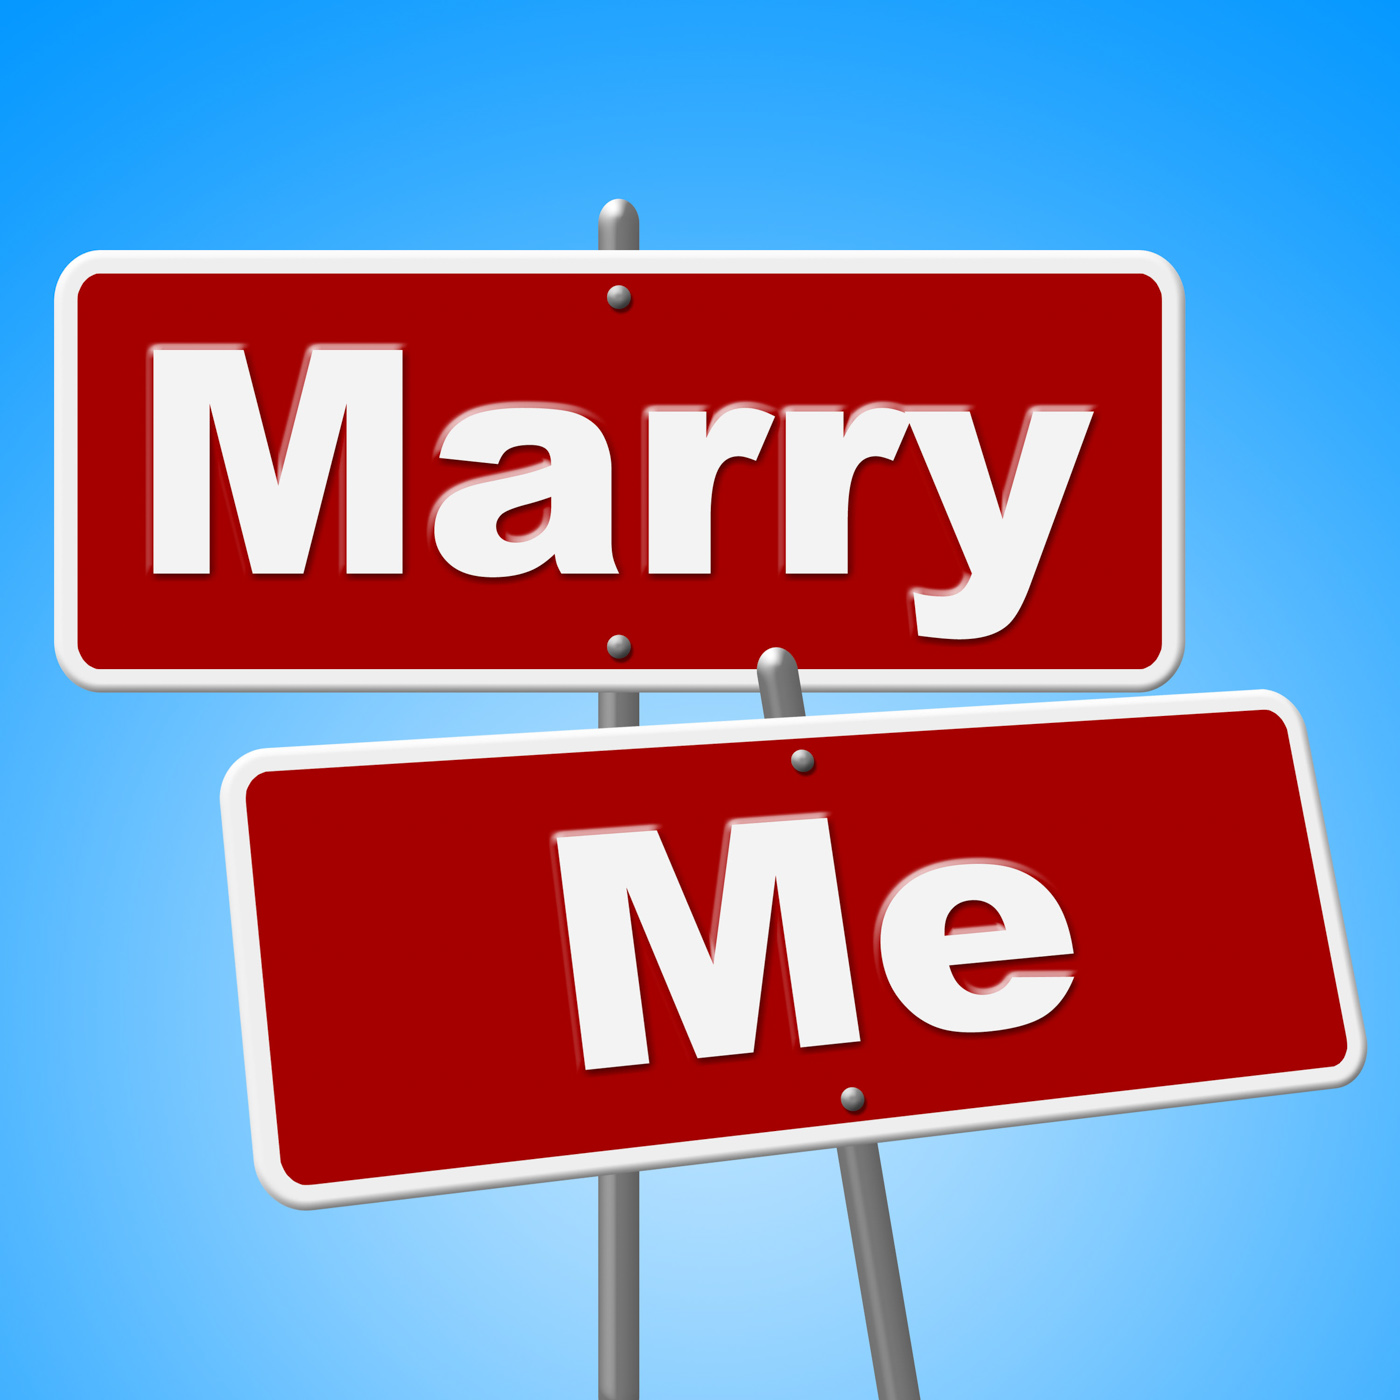 Marry me signs indicates get married and advertisement photo